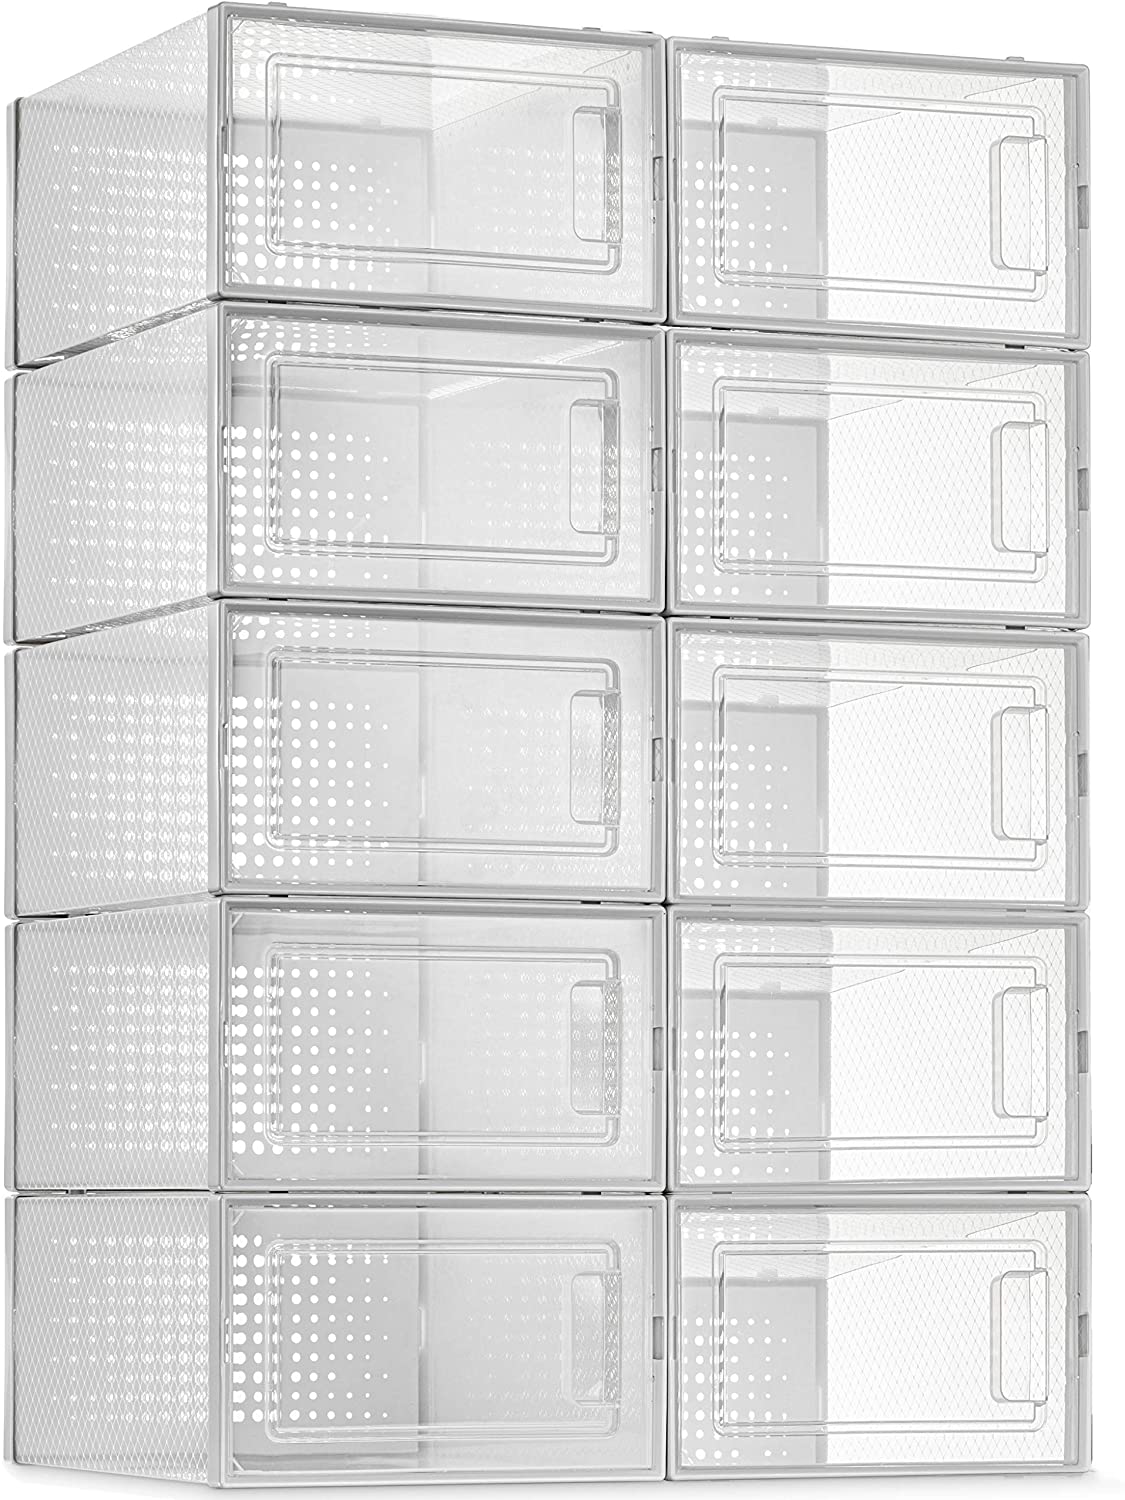 https://discounttoday.net/wp-content/uploads/2021/10/10-Pack-Shoe-Storage-Boxes-Clear-Plastic-Stackable-Shoe-Organizer-Bins-1.jpg